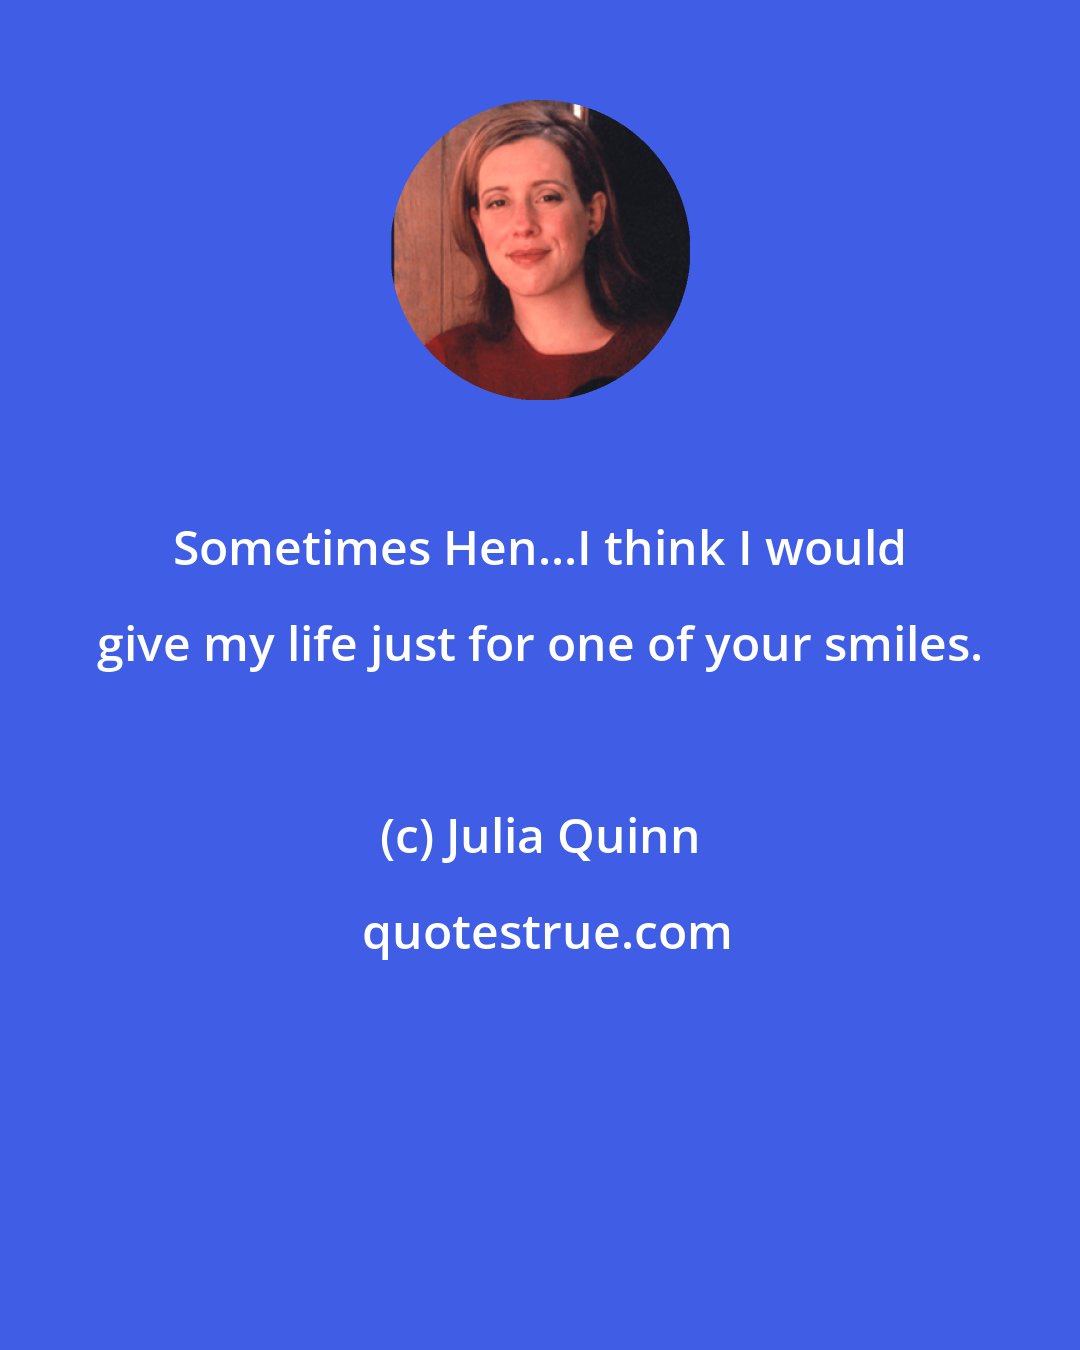 Julia Quinn: Sometimes Hen...I think I would give my life just for one of your smiles.